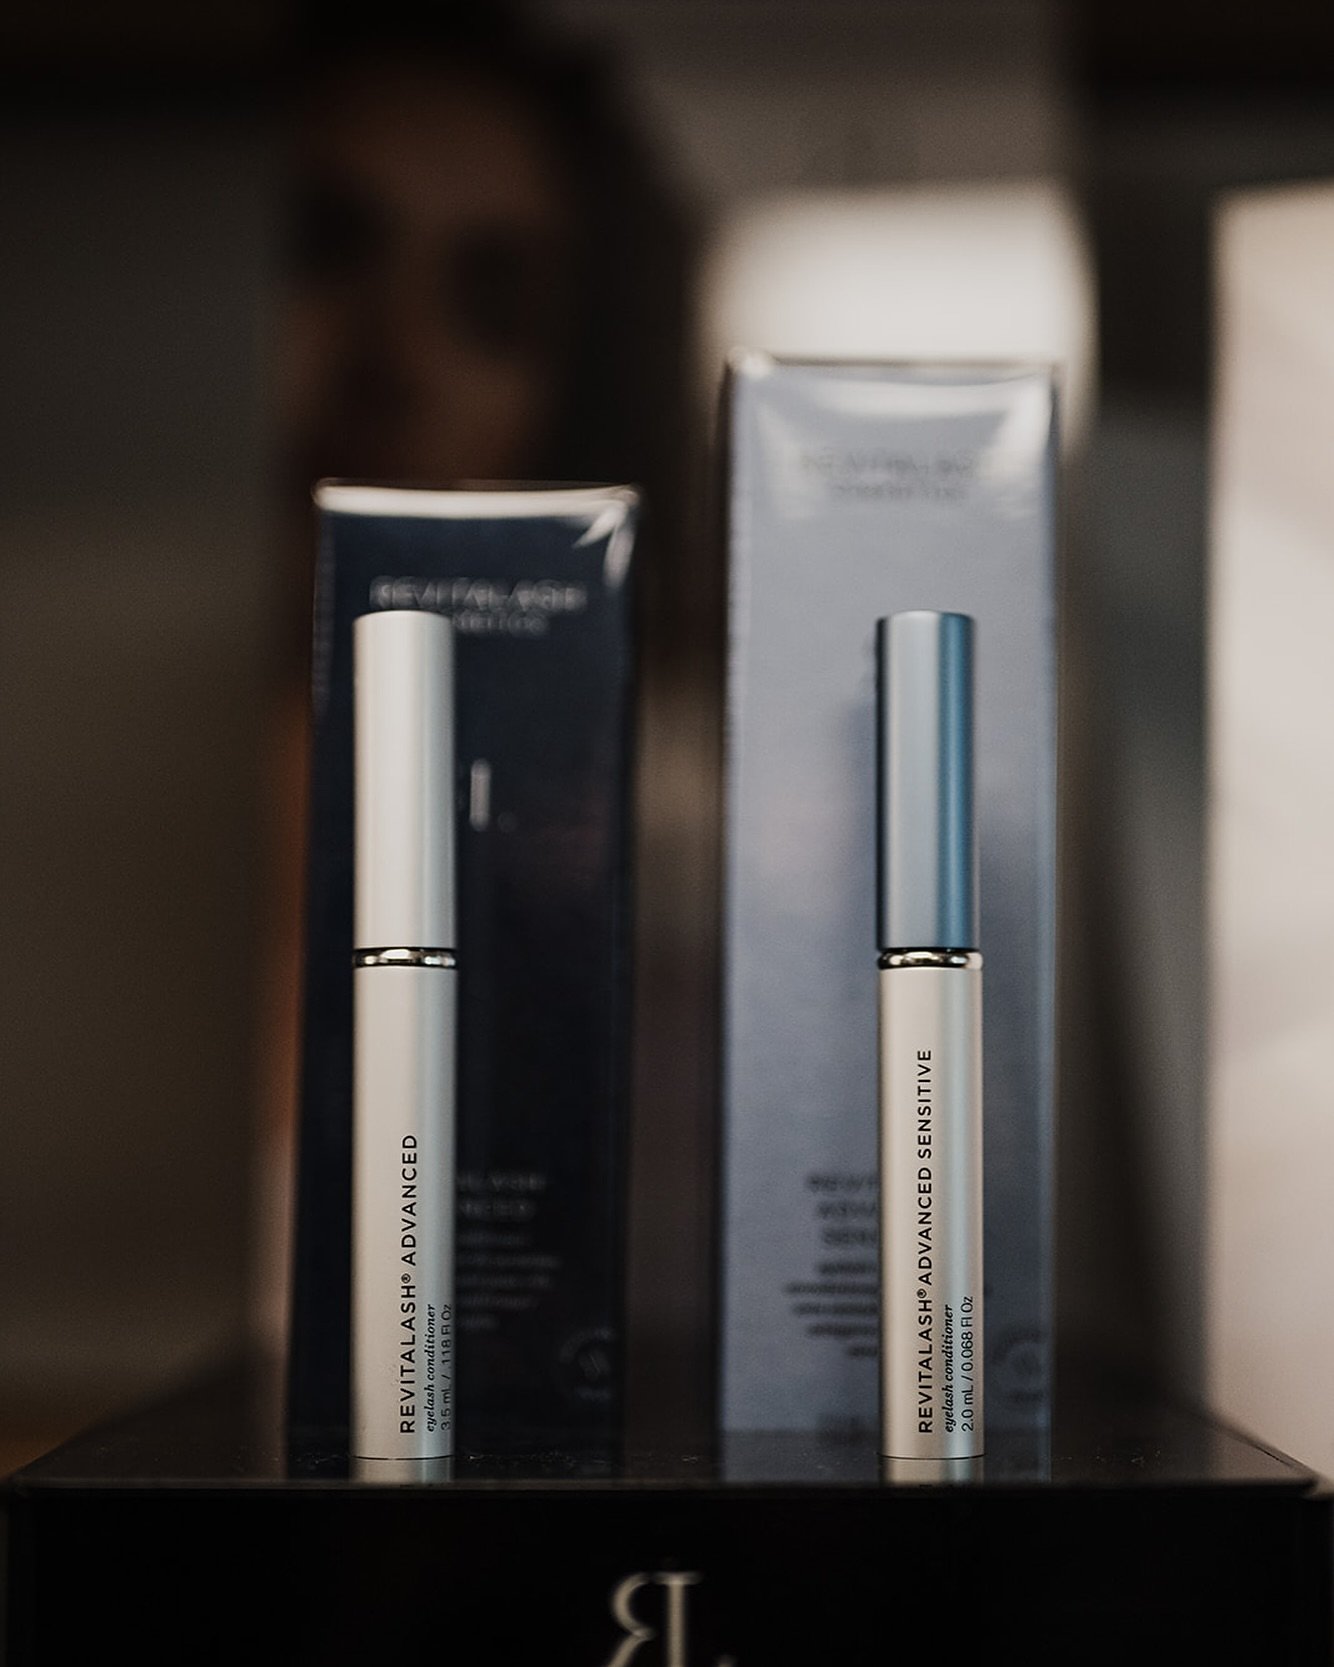 REVITALASH

Physician developed lash conditioning serum @revitalashcosmetics addresses the visible signs of eyelash aging due to chemical and environmental stressors, leading to healthier-looking, more luxurious lashes.

This award-winning serum feat